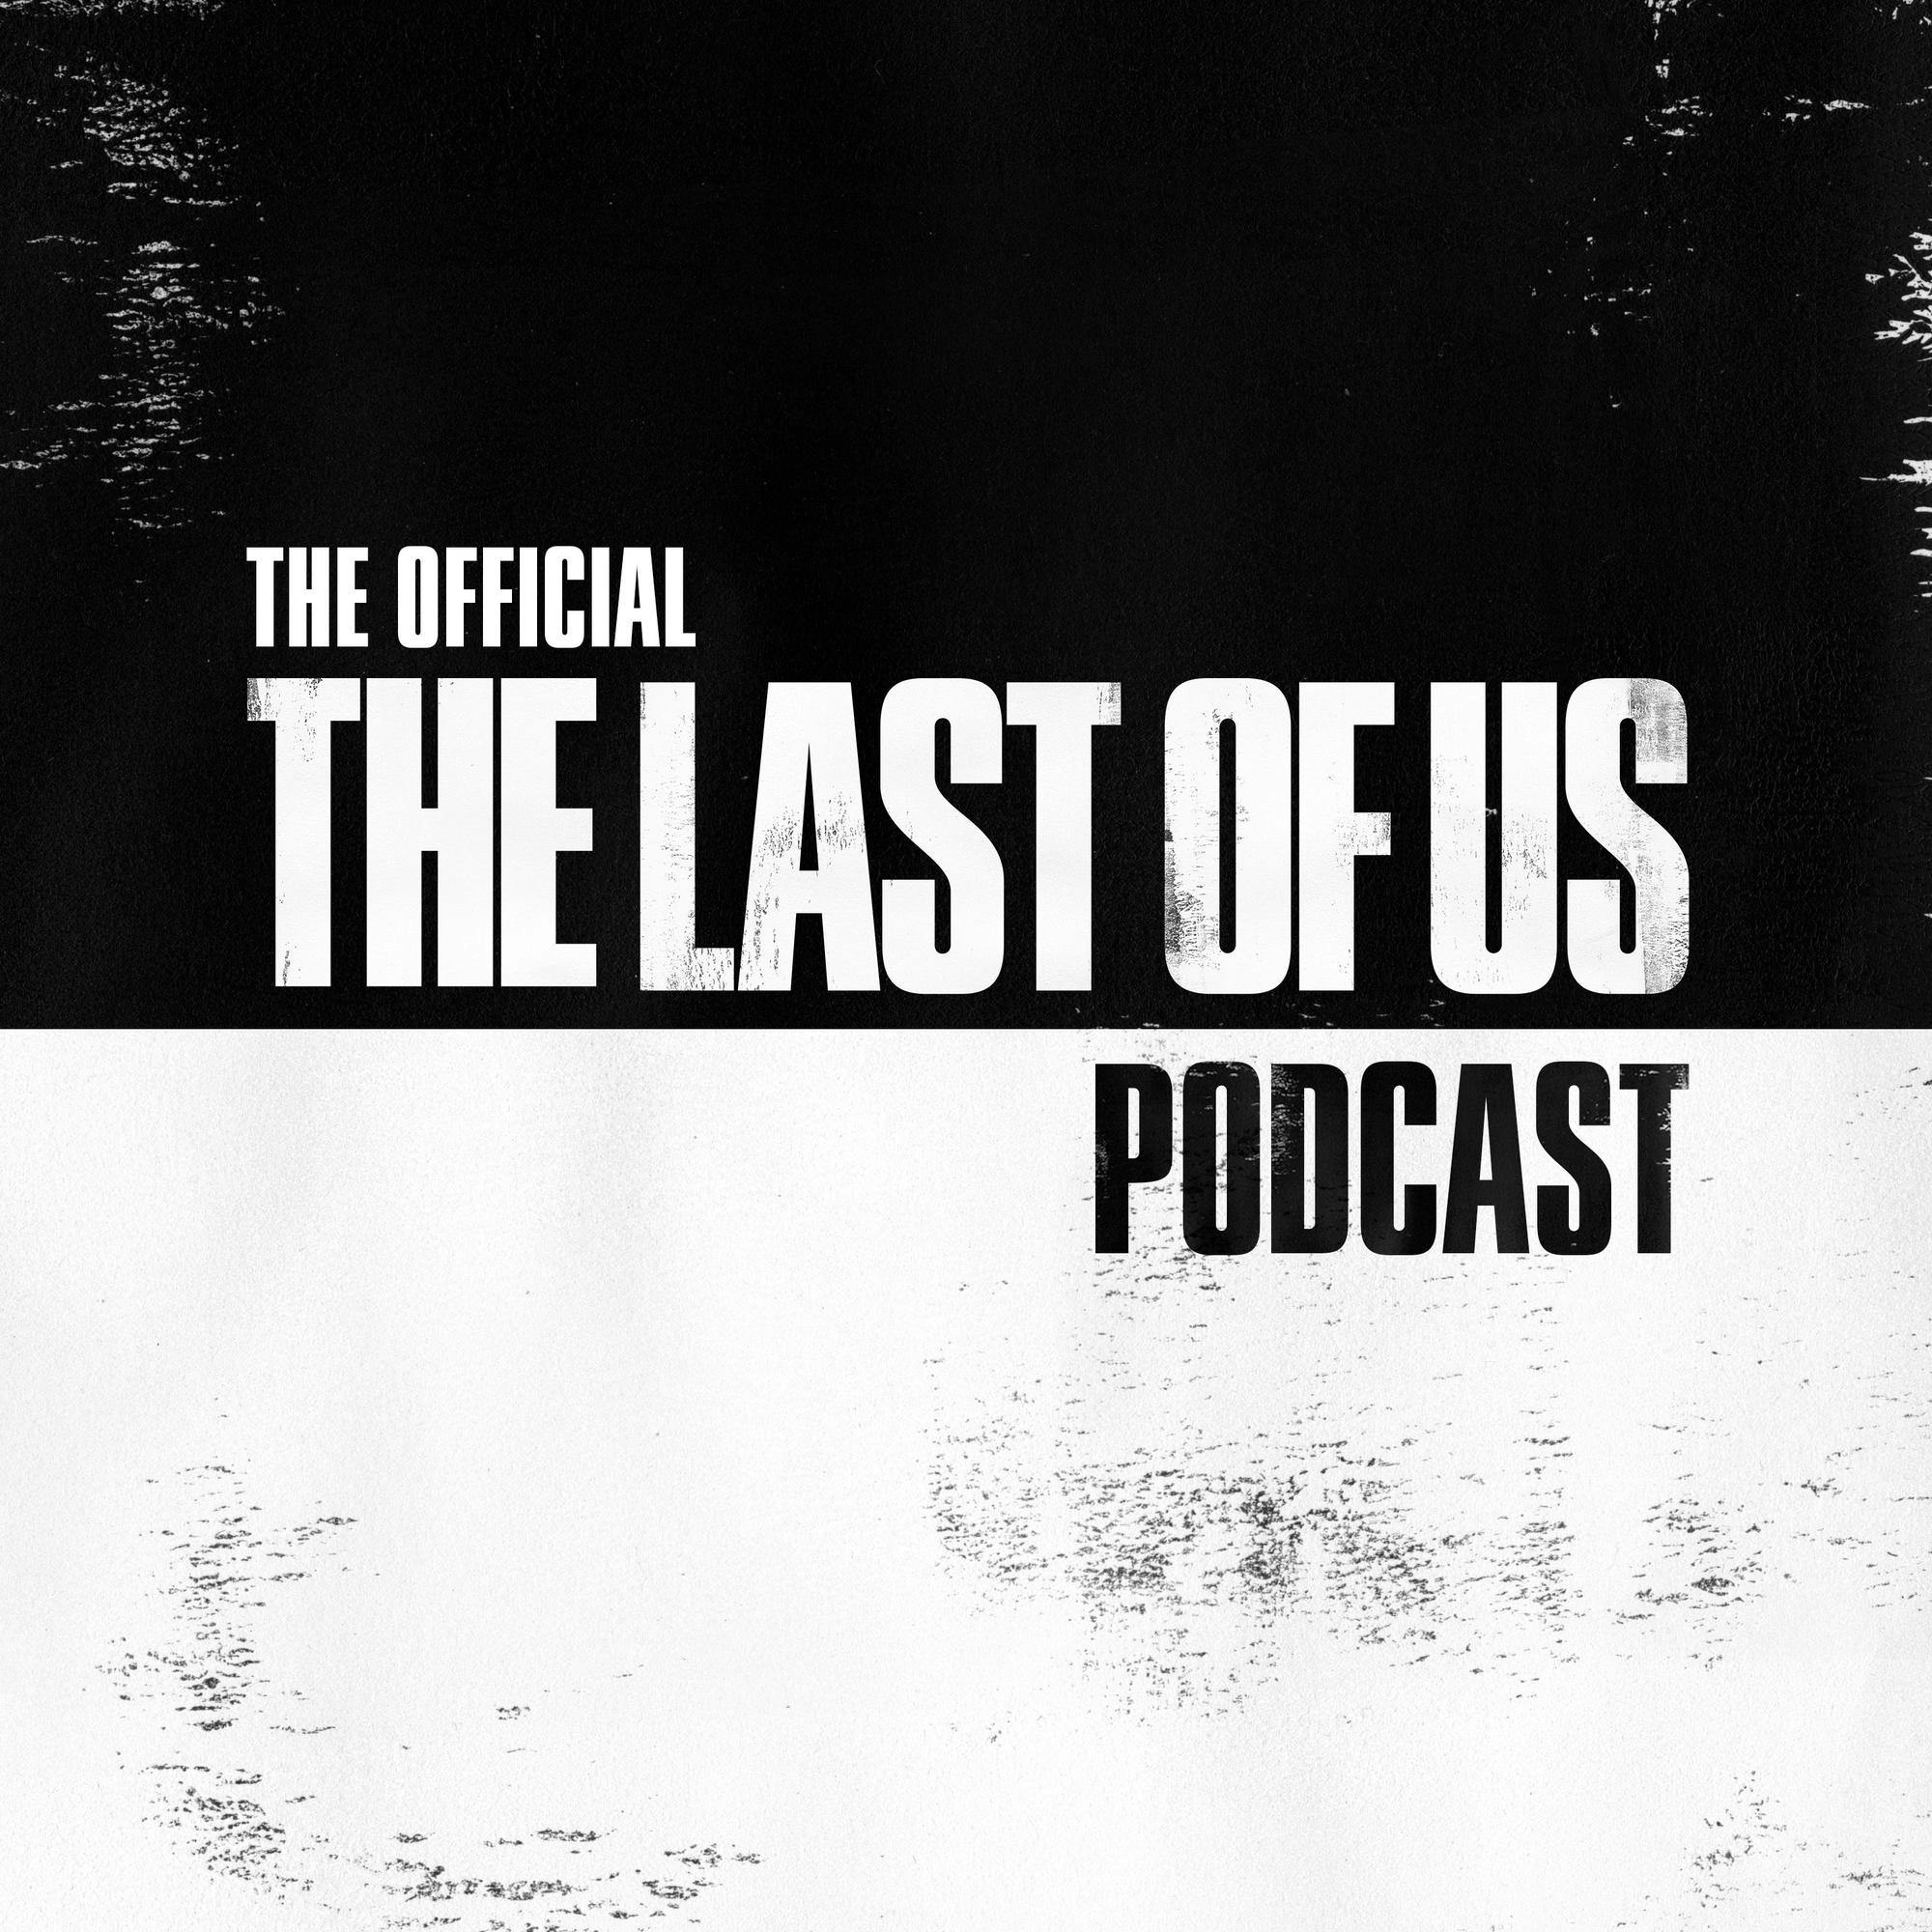 The Official The Last of Us Podcast podcast